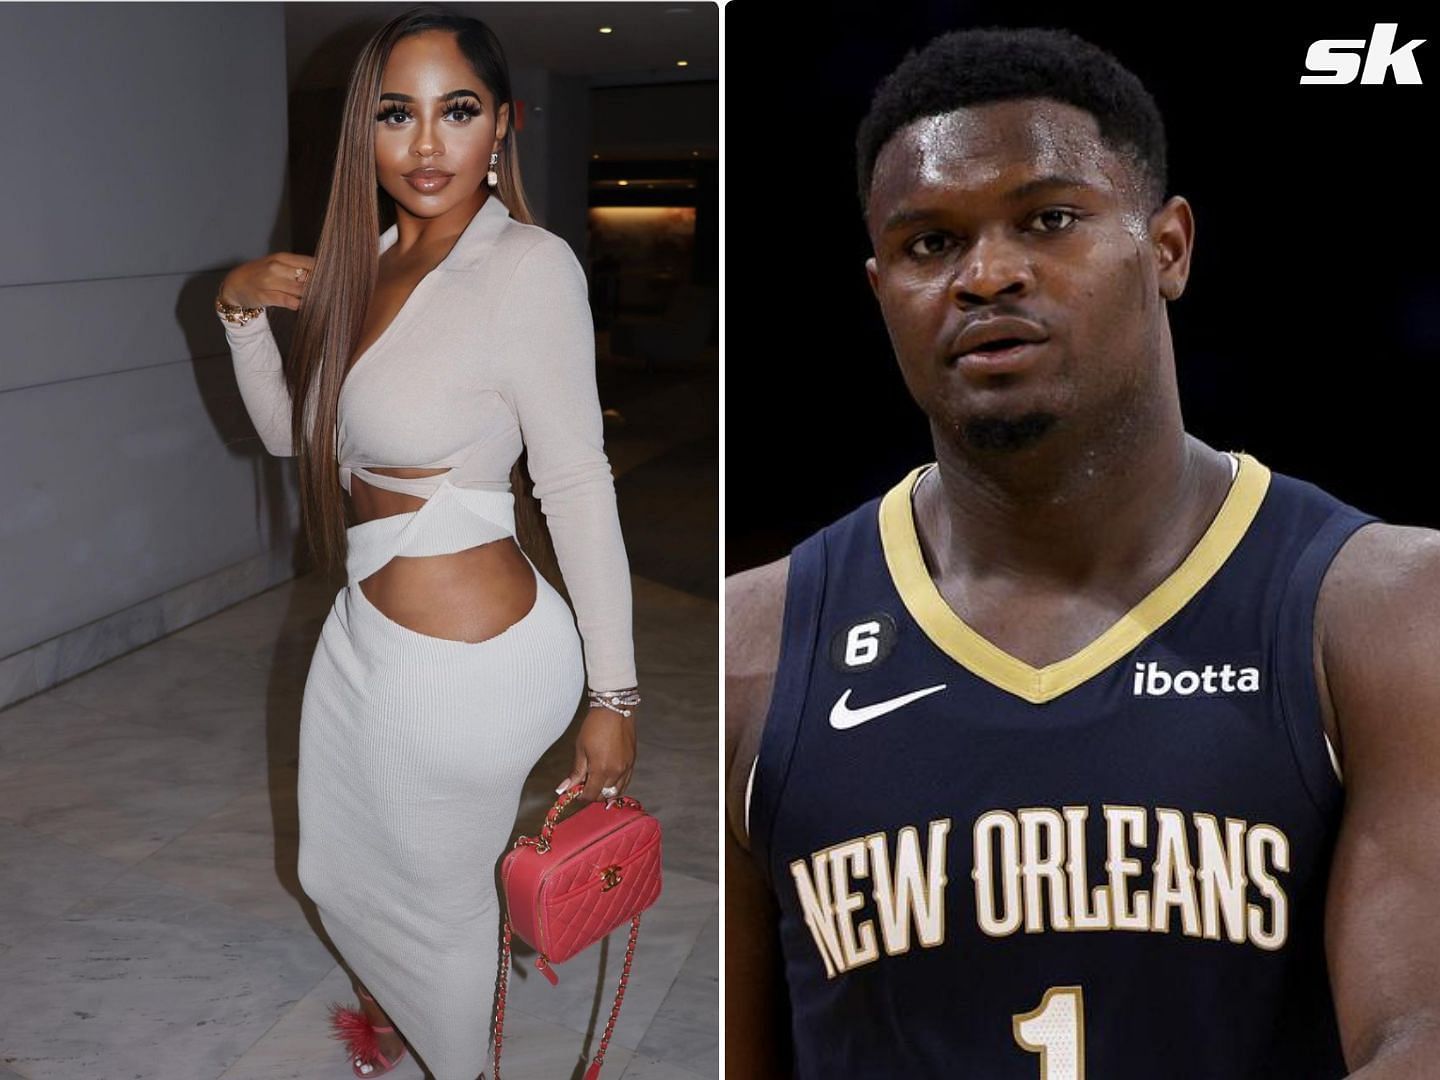 Another Instagram model has called out Zion Williamson